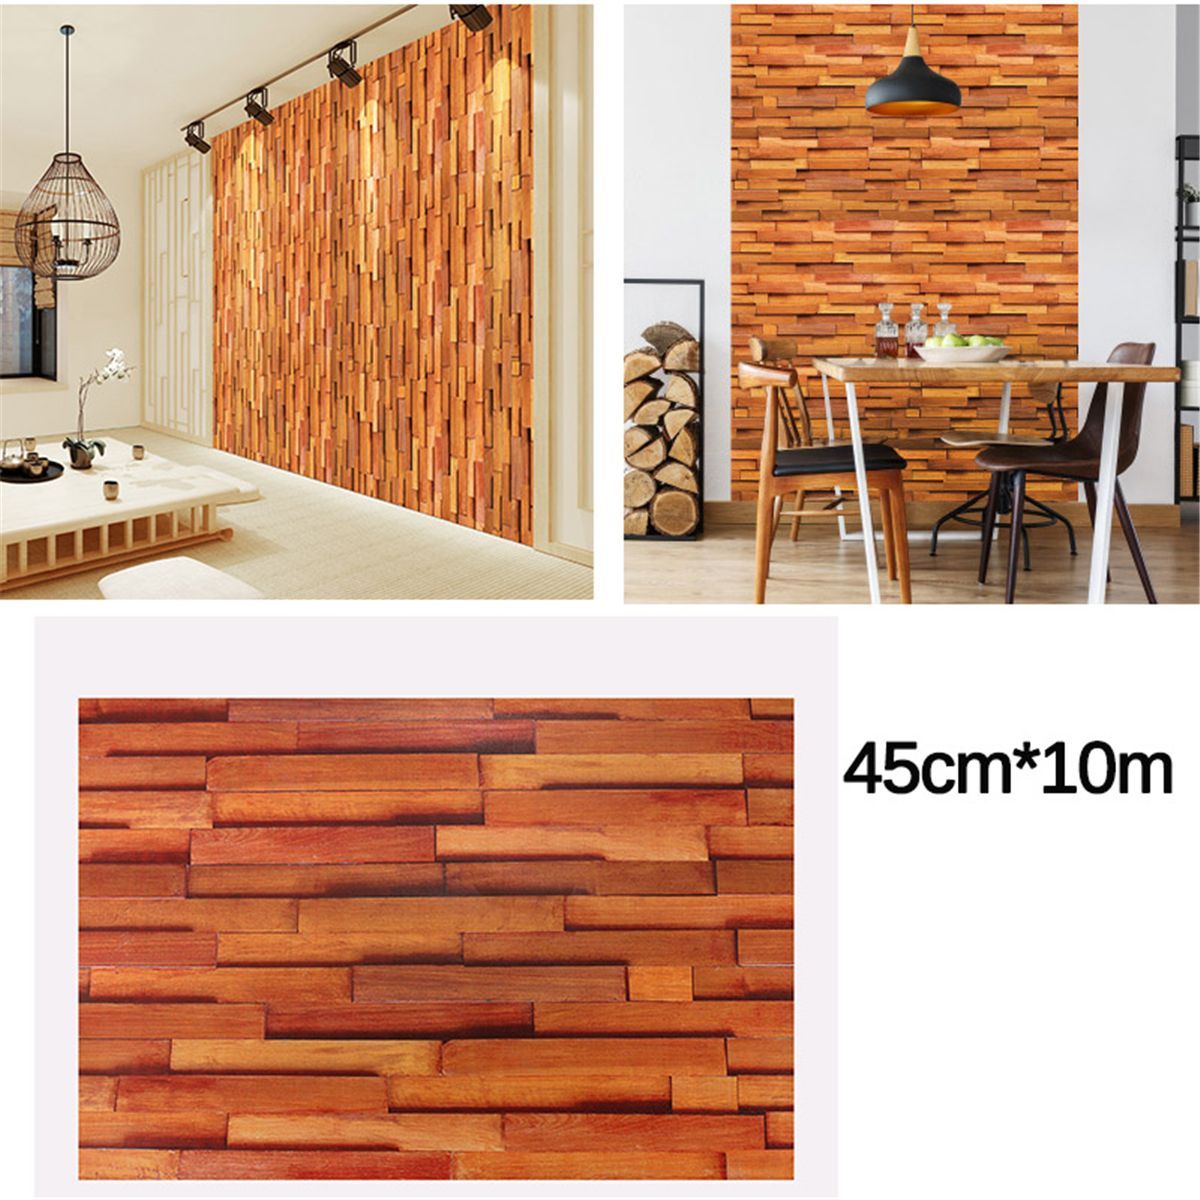 Wood-Grain-Self-adhesive-Wall-Paper-Waterproof-Bedroom-Cabinets-Dormitory-Restaurant-Cafe-Wall-Stick-1630524